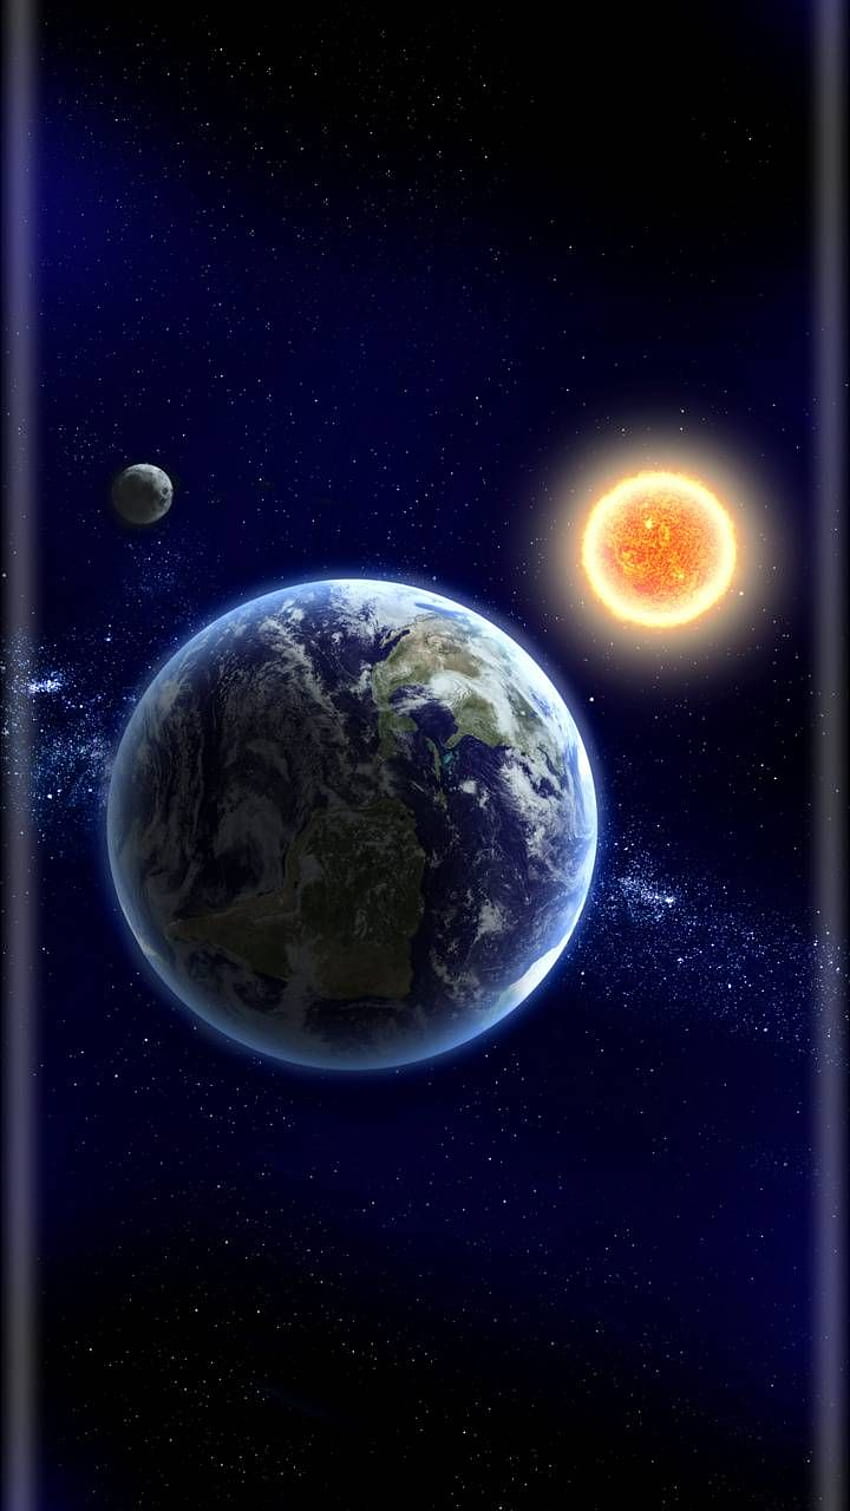 Sun and Moon wallpaper by Breezy84  Download on ZEDGE  e8a2